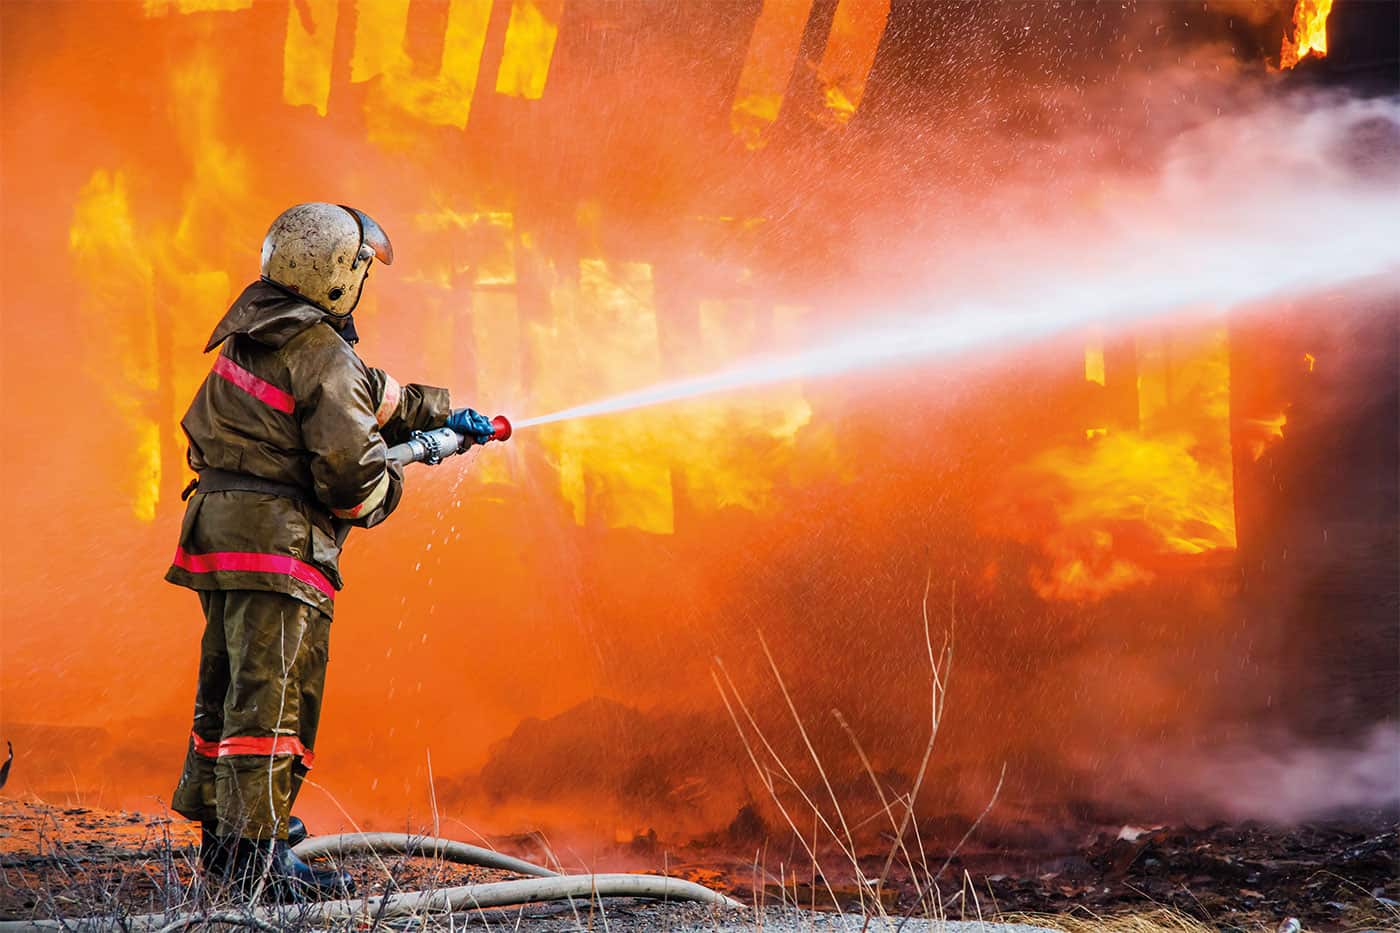 A firefighter putting out a fire